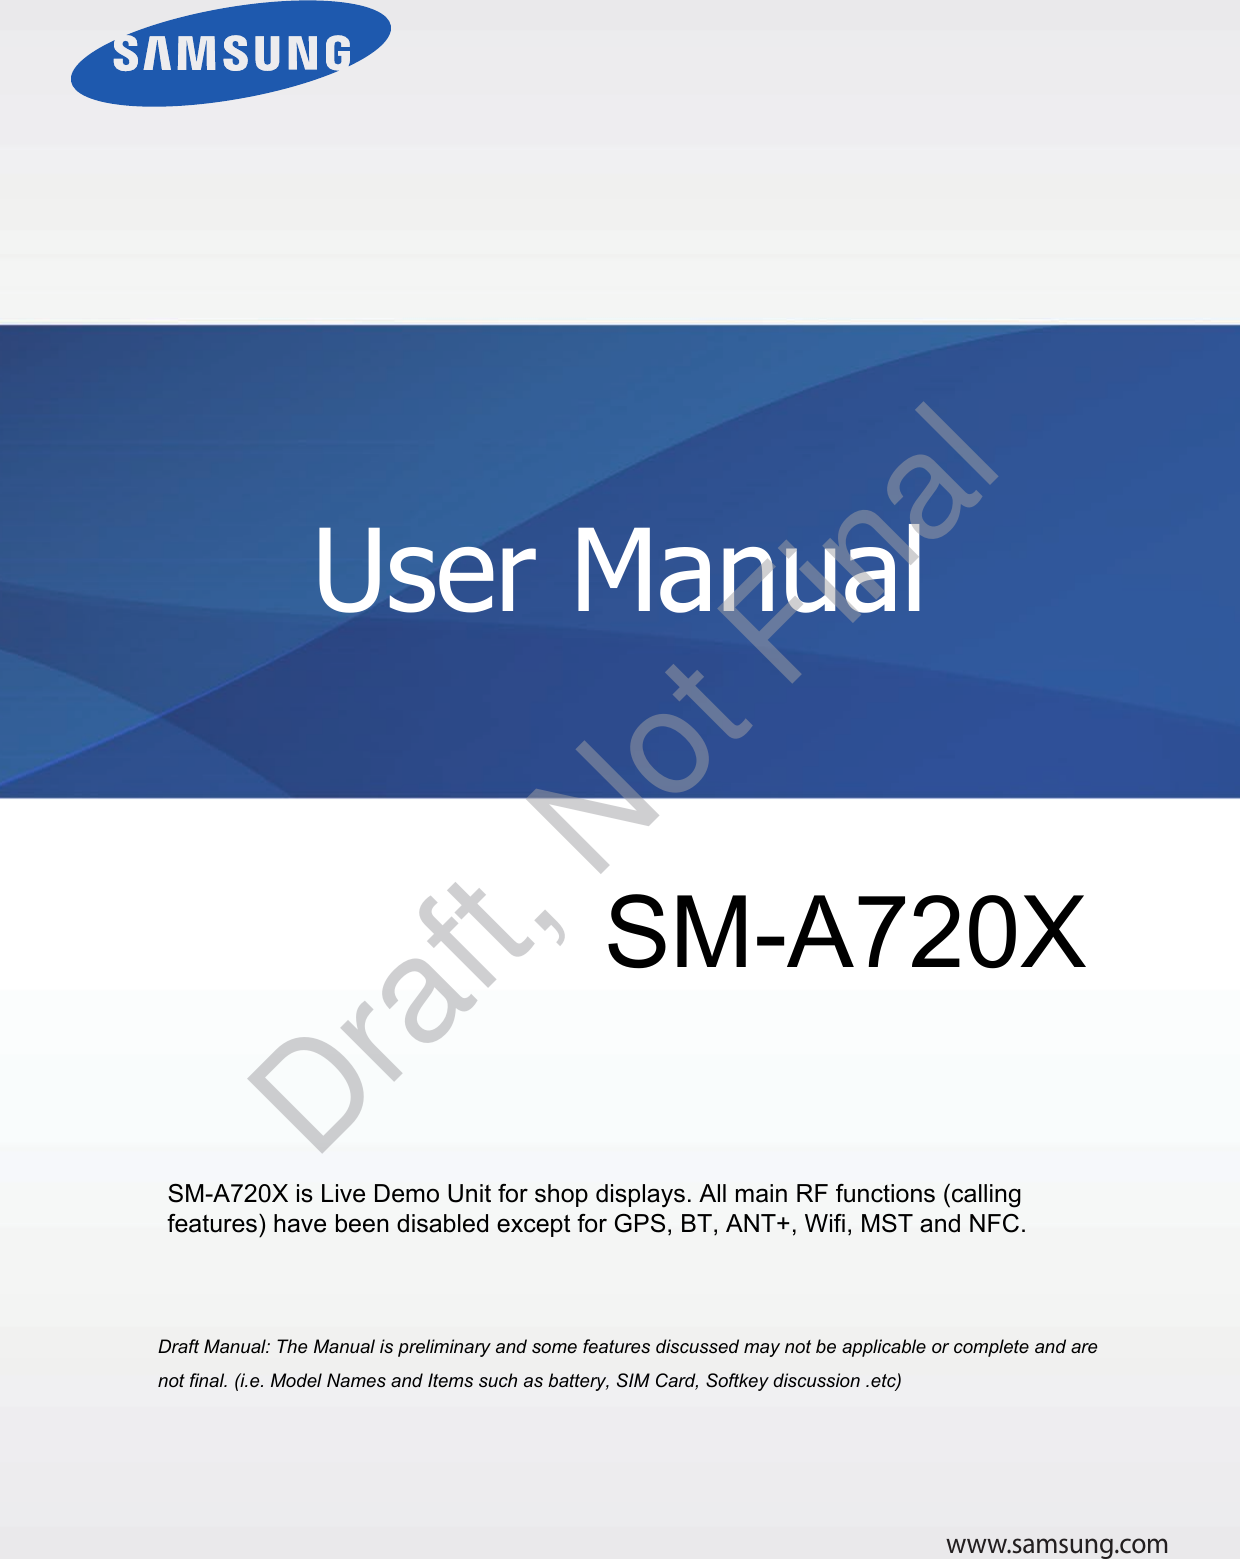 www.samsung.comUser Manuala ana  ana  na and  a dd a n  aa   and a n na  d a and   a a  ad  dn SM-A720X SM-A720X is Live Demo Unit for shop displays. All main RF functions (calling features) have been disabled except for GPS, BT, ANT+, Wifi, MST and NFC.Draft, Not Final